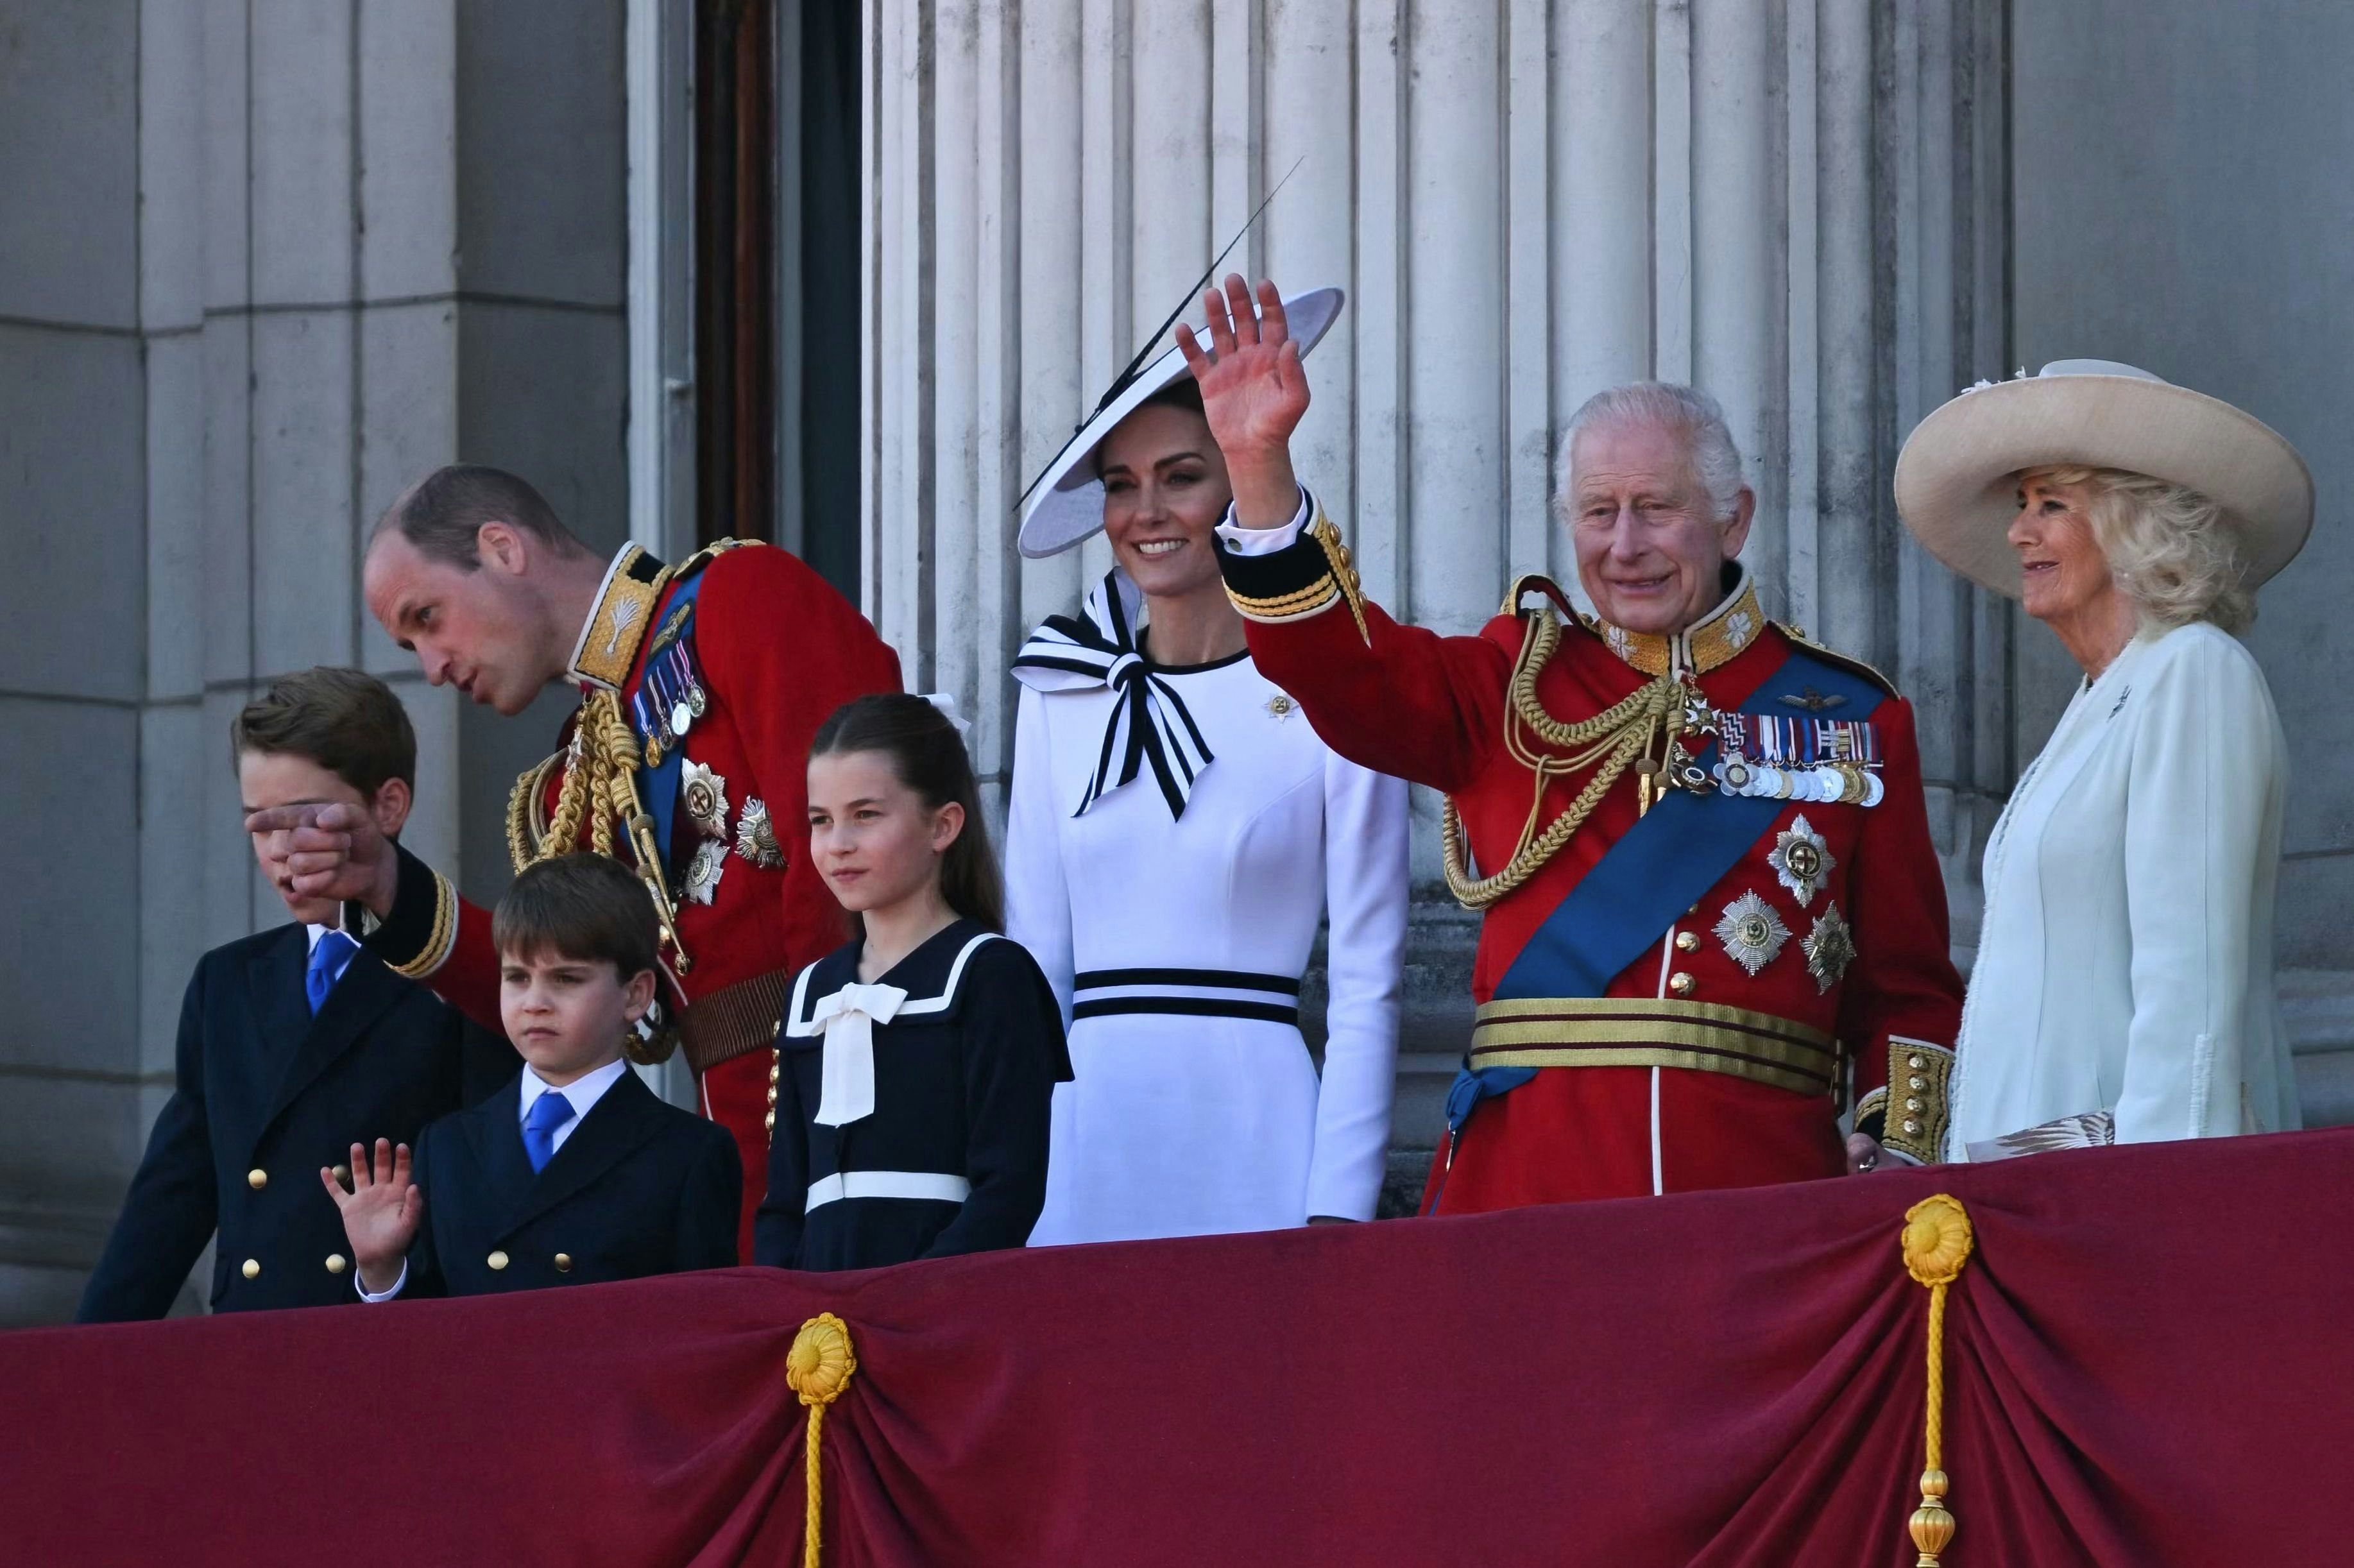 Britain's King Charles III (2R) waves from the balcony of Buckingham Palace after attending the King's Birthday Parade, "Trooping the Colour", in London, on June 15, 2024. The ceremony of Trooping the Colour is believed to have first been performed during the reign of King Charles II. Since 1748, the Trooping of the Colour has marked the official birthday of the British Sovereign. Over 1500 parading soldiers and almost 300 horses take part in the event. (Photo by JUSTIN TALLIS / AFP)